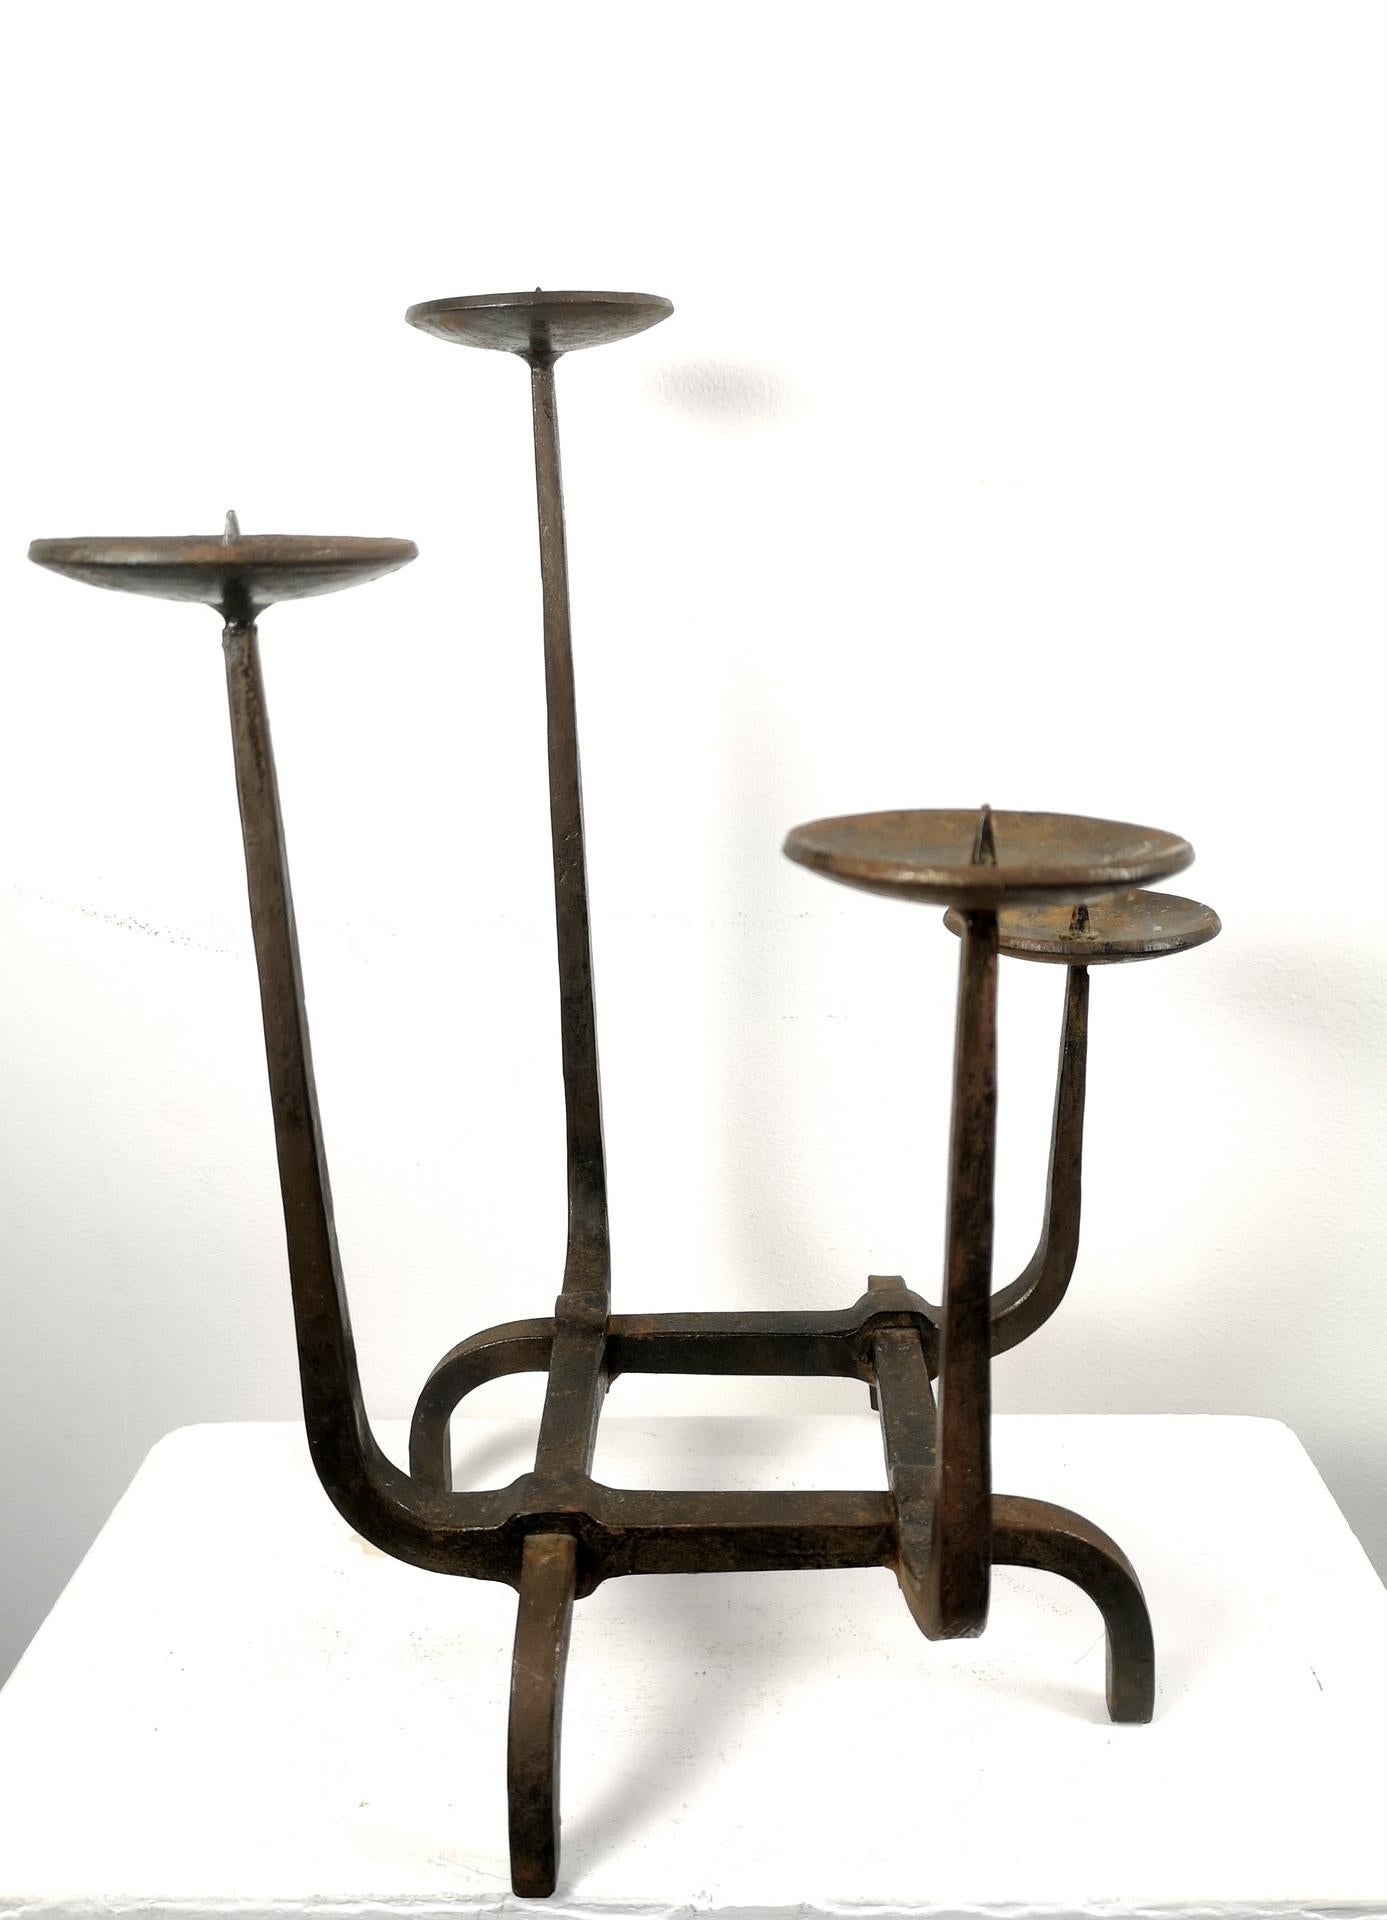 This hand-hammered iron candelabra has intertwining steel body with different height for different candles- it's a rare, large scale piece from the 1970's, and is signed Nausch (by Geza Nausch famous hungarian smith, metalsmith, born 1941).

